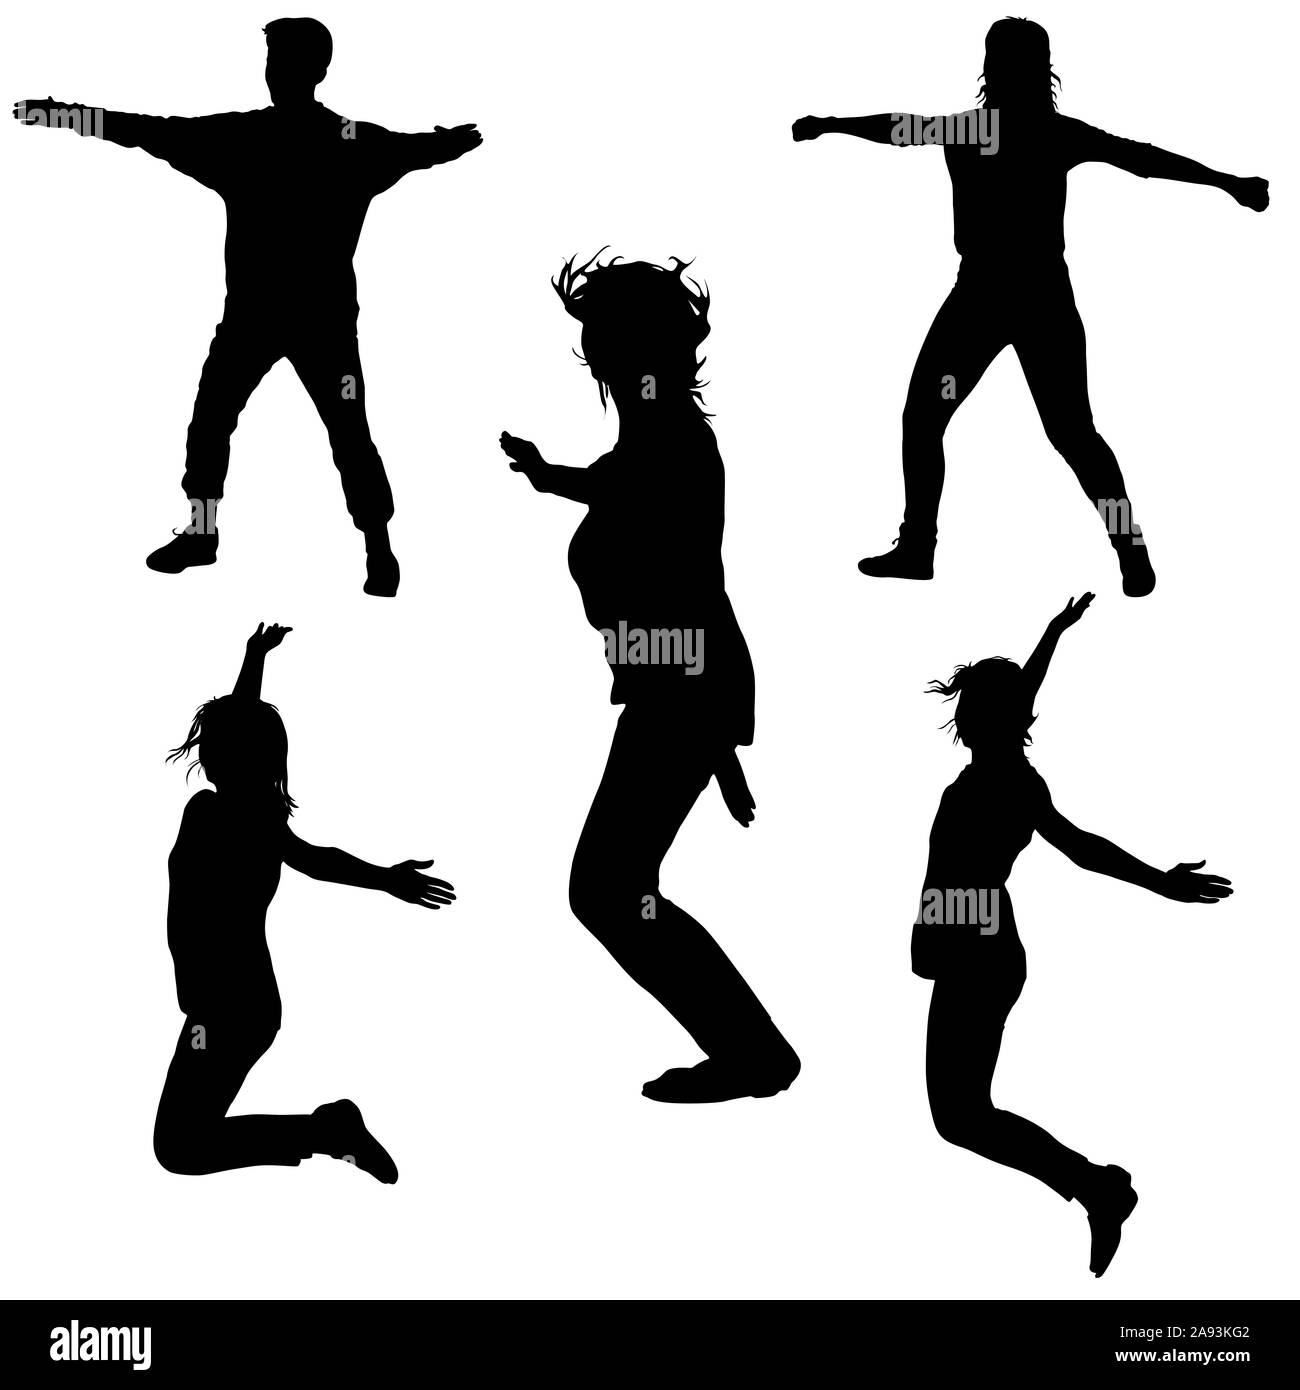 Silhouette of young people jumping with hands up, motion. Stock Photo